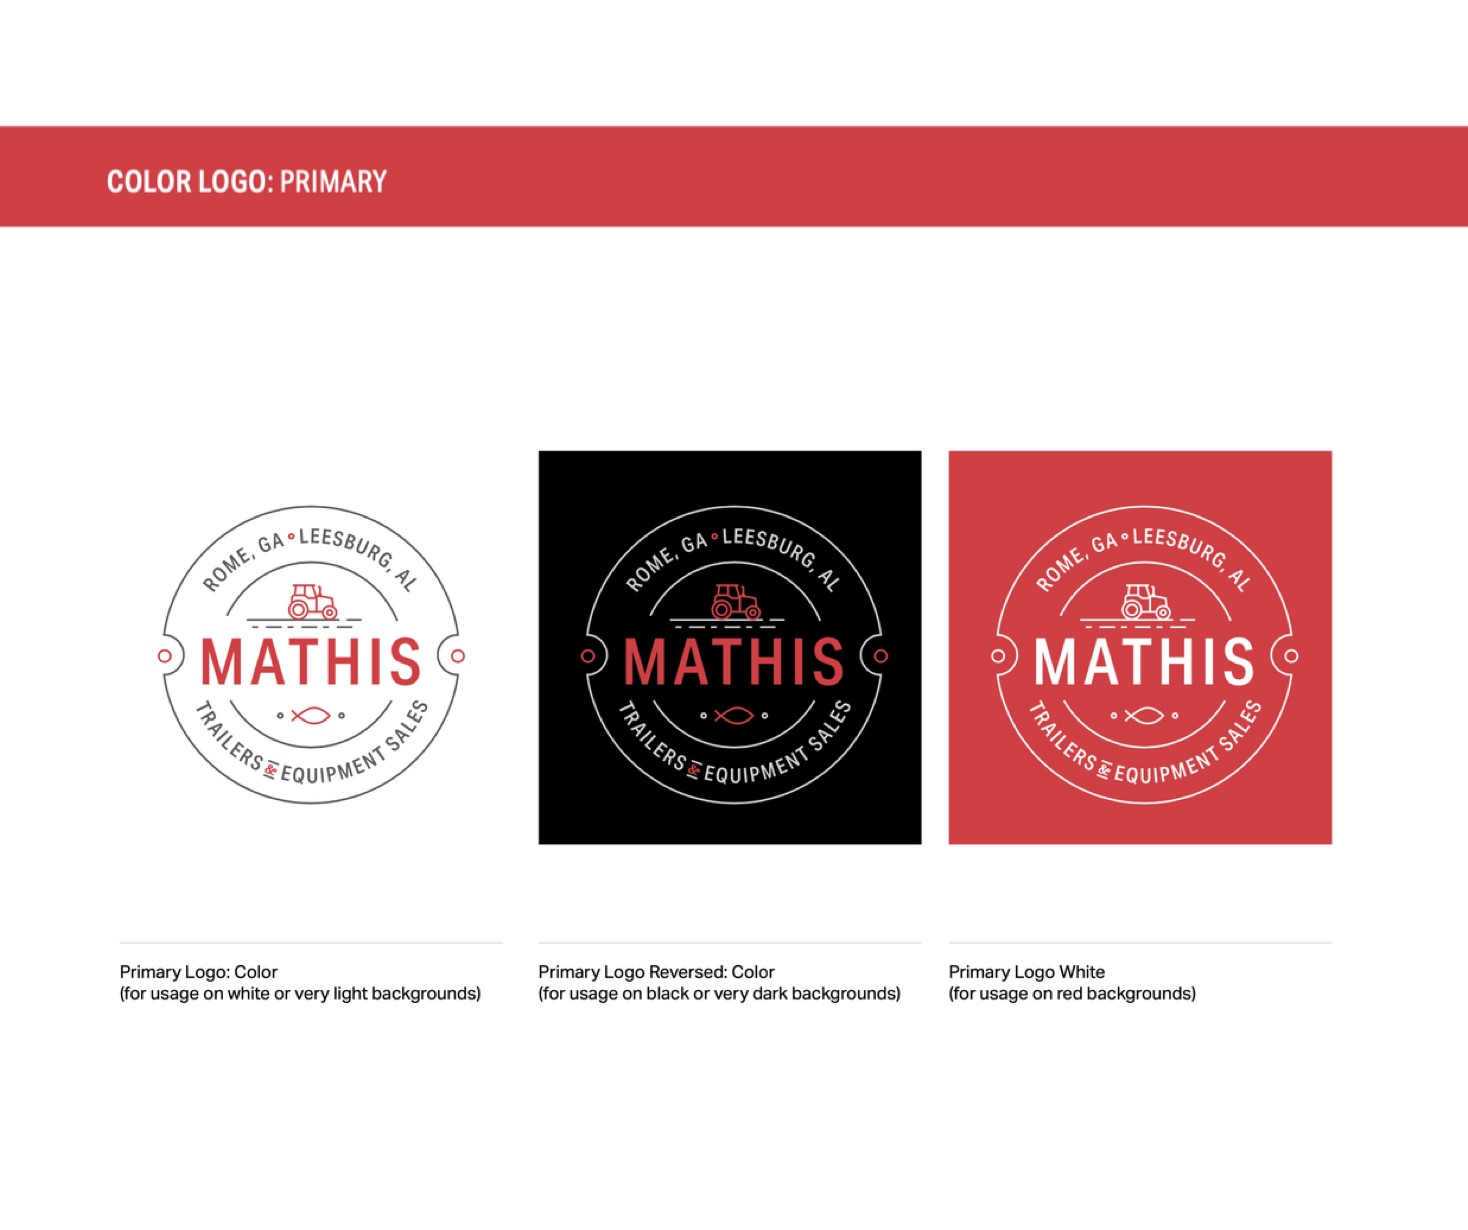 Graphic showing different versions of the Mathis logo